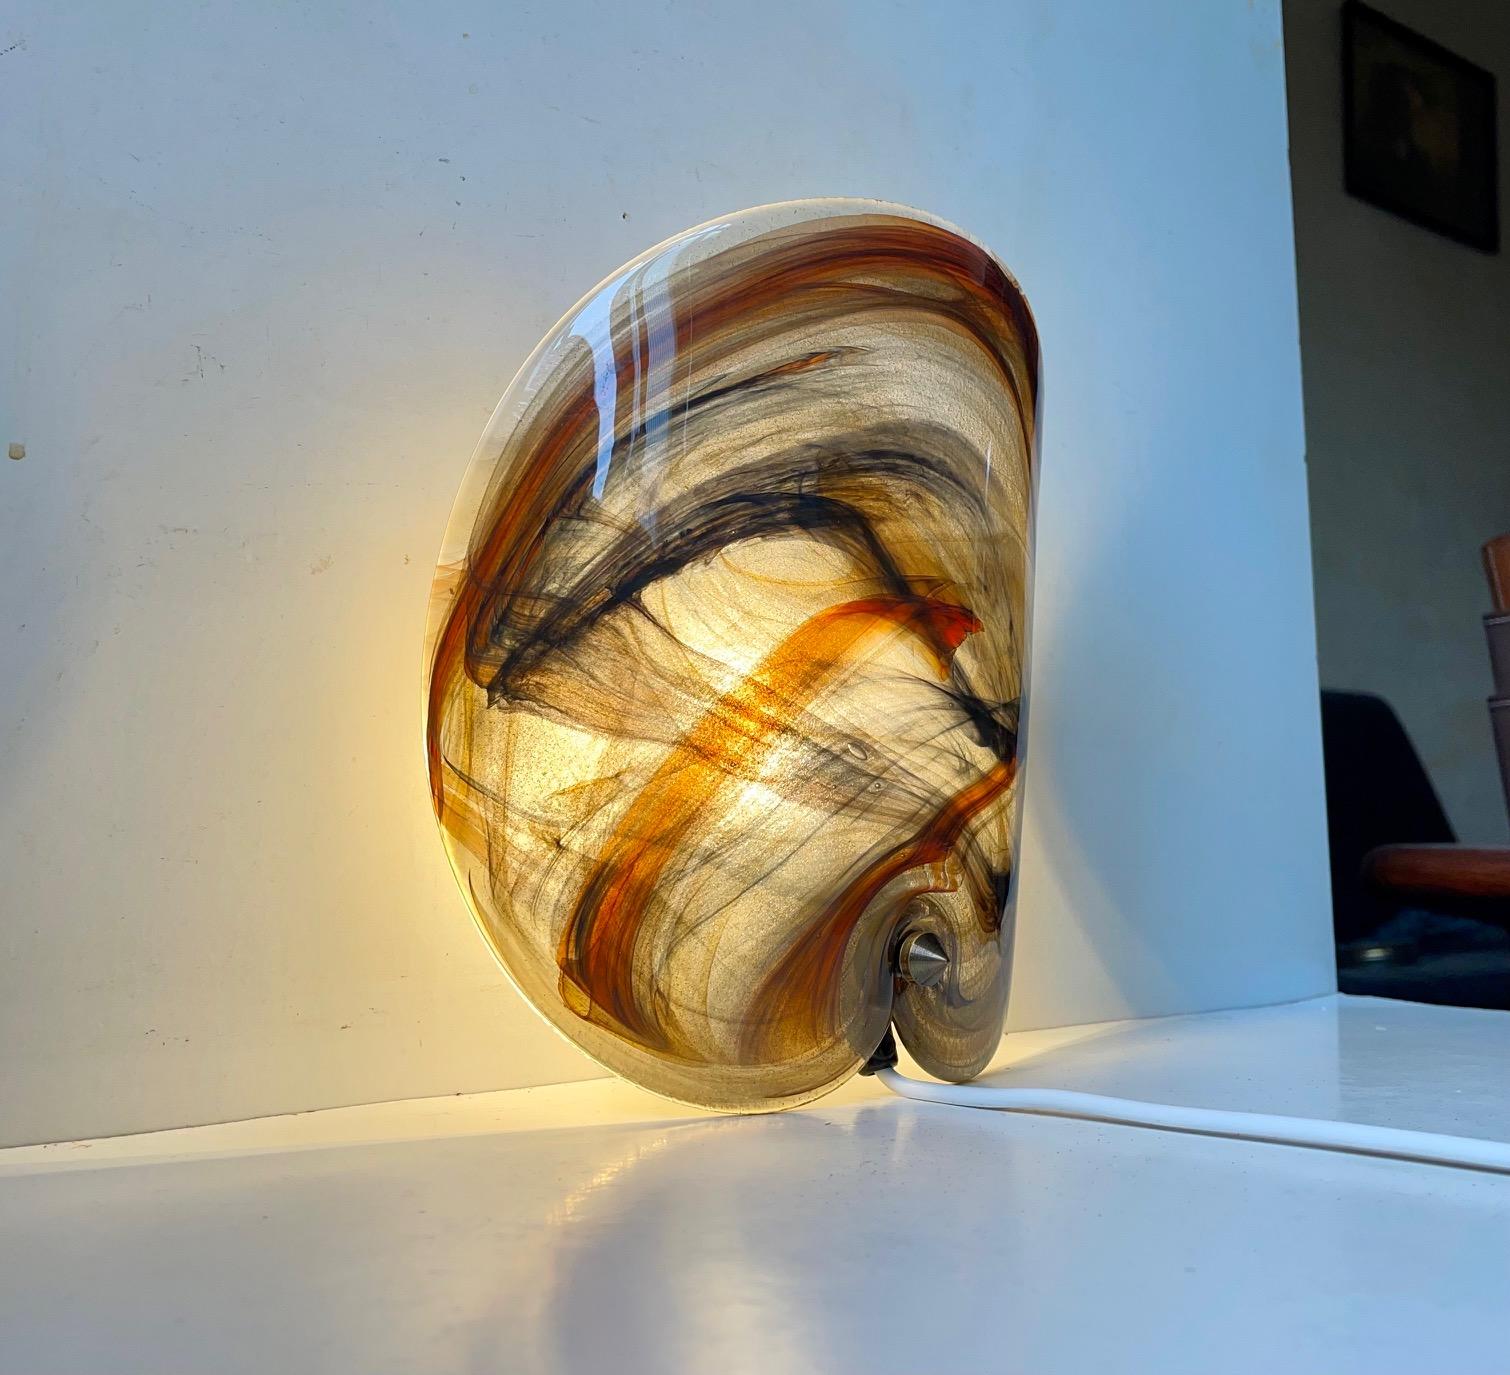 Bend circular wall sconce made from thick hand blown glass with incapsulated glass threads in orange, black, grey, brown etc. It was designed by Per Lütken and manufactured Holmegaard in Denmark during the late 1970s. Measurements: 25 x 22 x 10 cm.